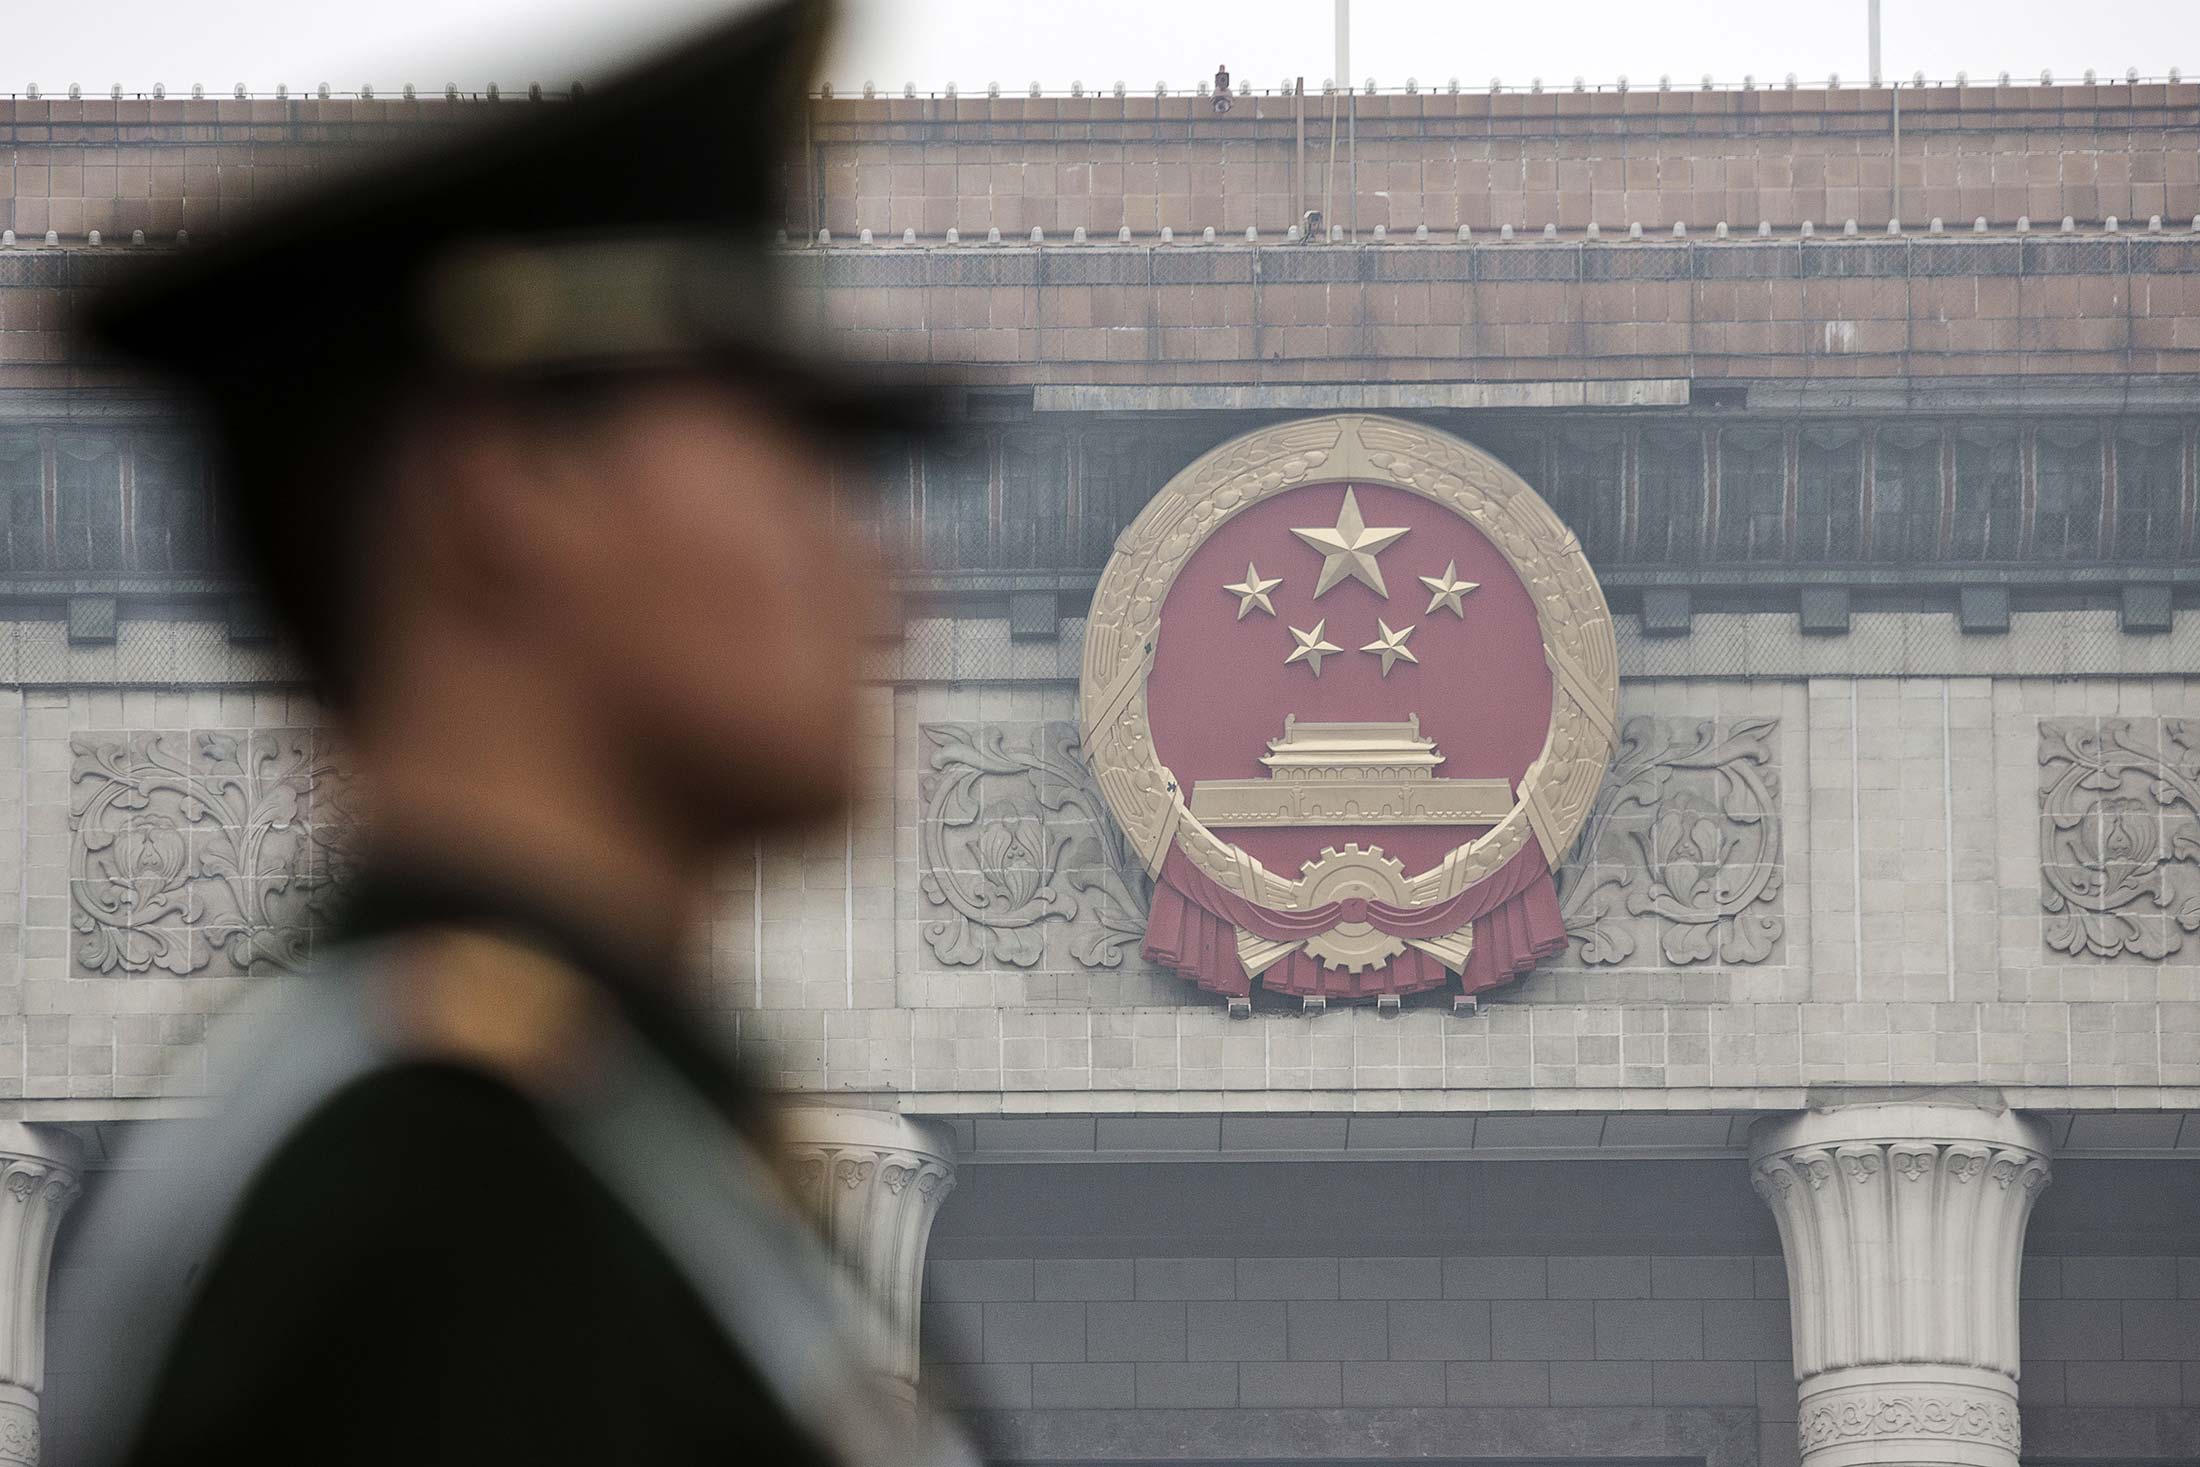 A paramilitary police officer stands guard in front of the Great Hall of the People in Beijing, China.
